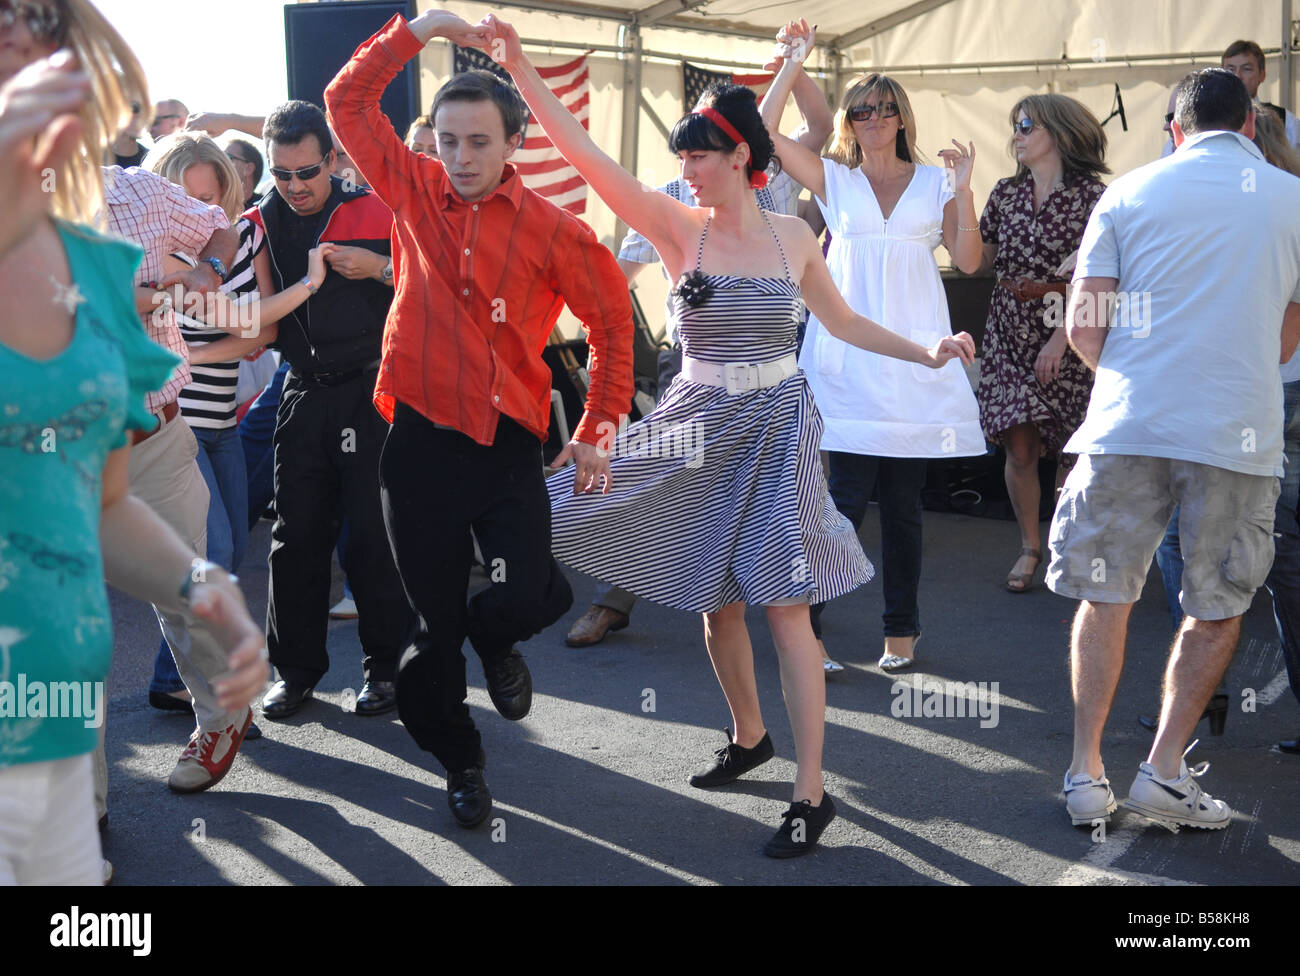 People dancing to live music at the Brightona motorcycle event on Brighton seafront UK Stock Photo